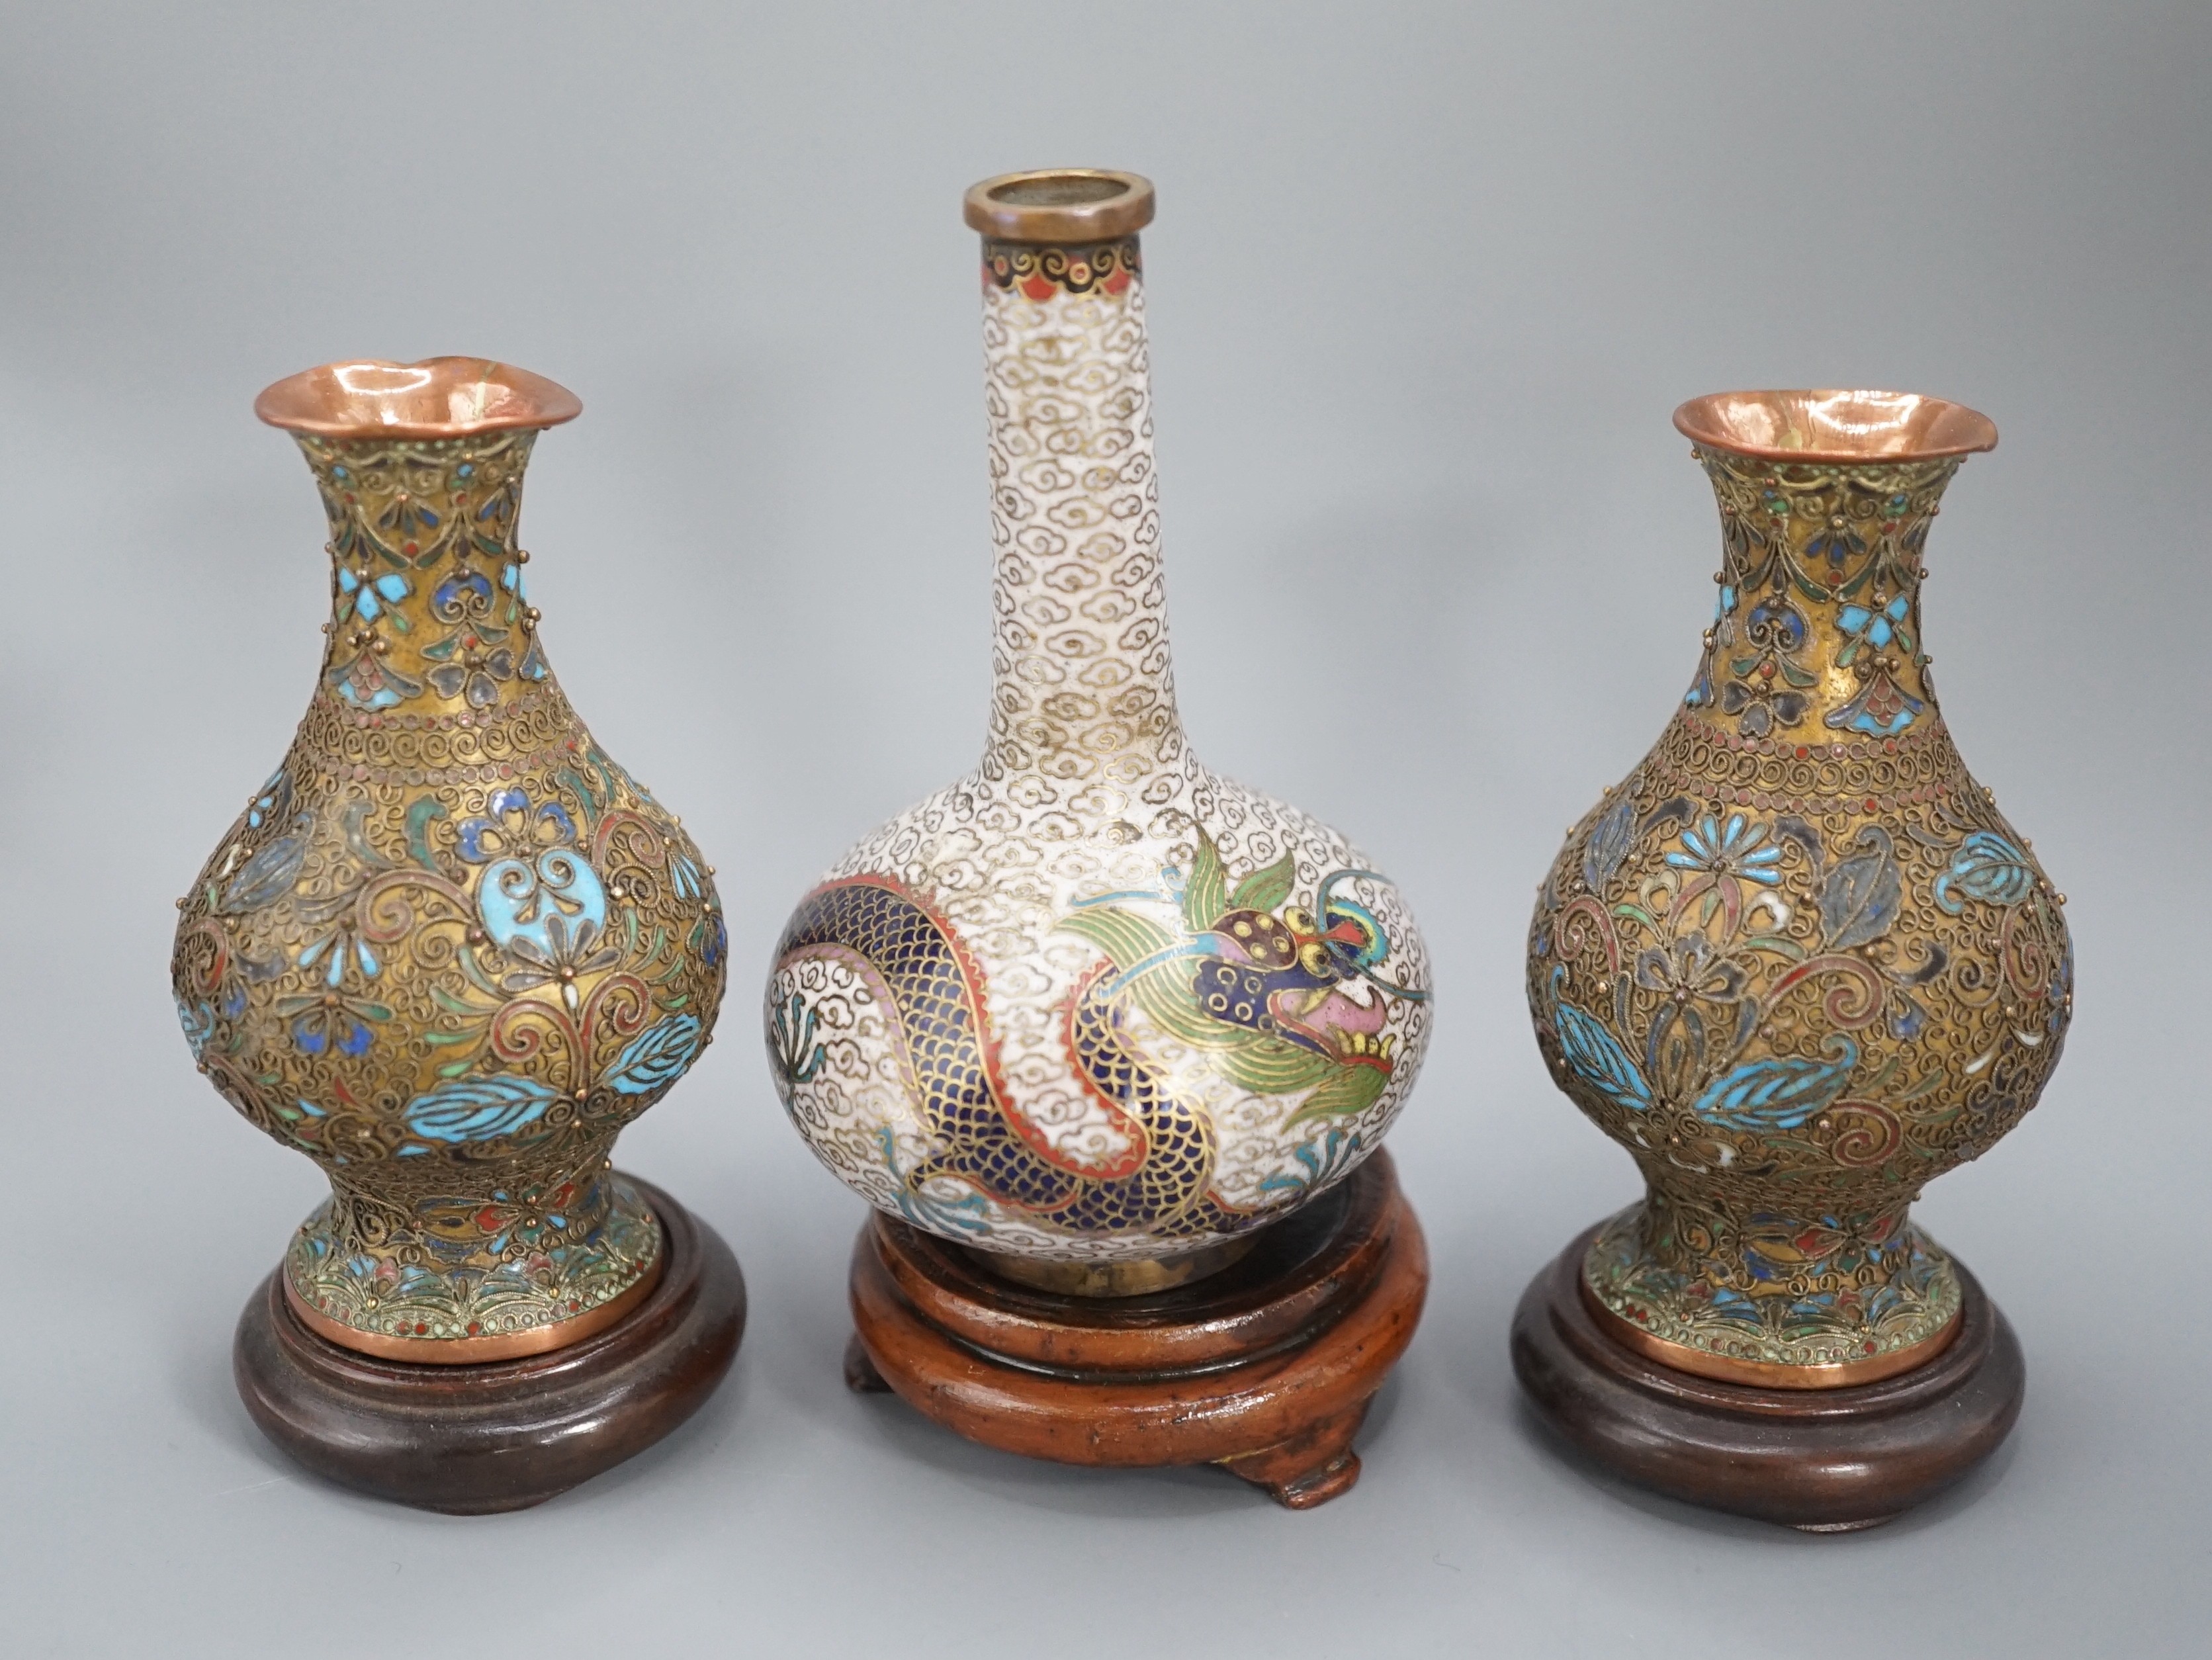 A Chinese cloisonne enamel ‘dragon’ bottle vase, early 20th century and a pair of Japanese cloisonne enamel vases with wood stands 10.5cm